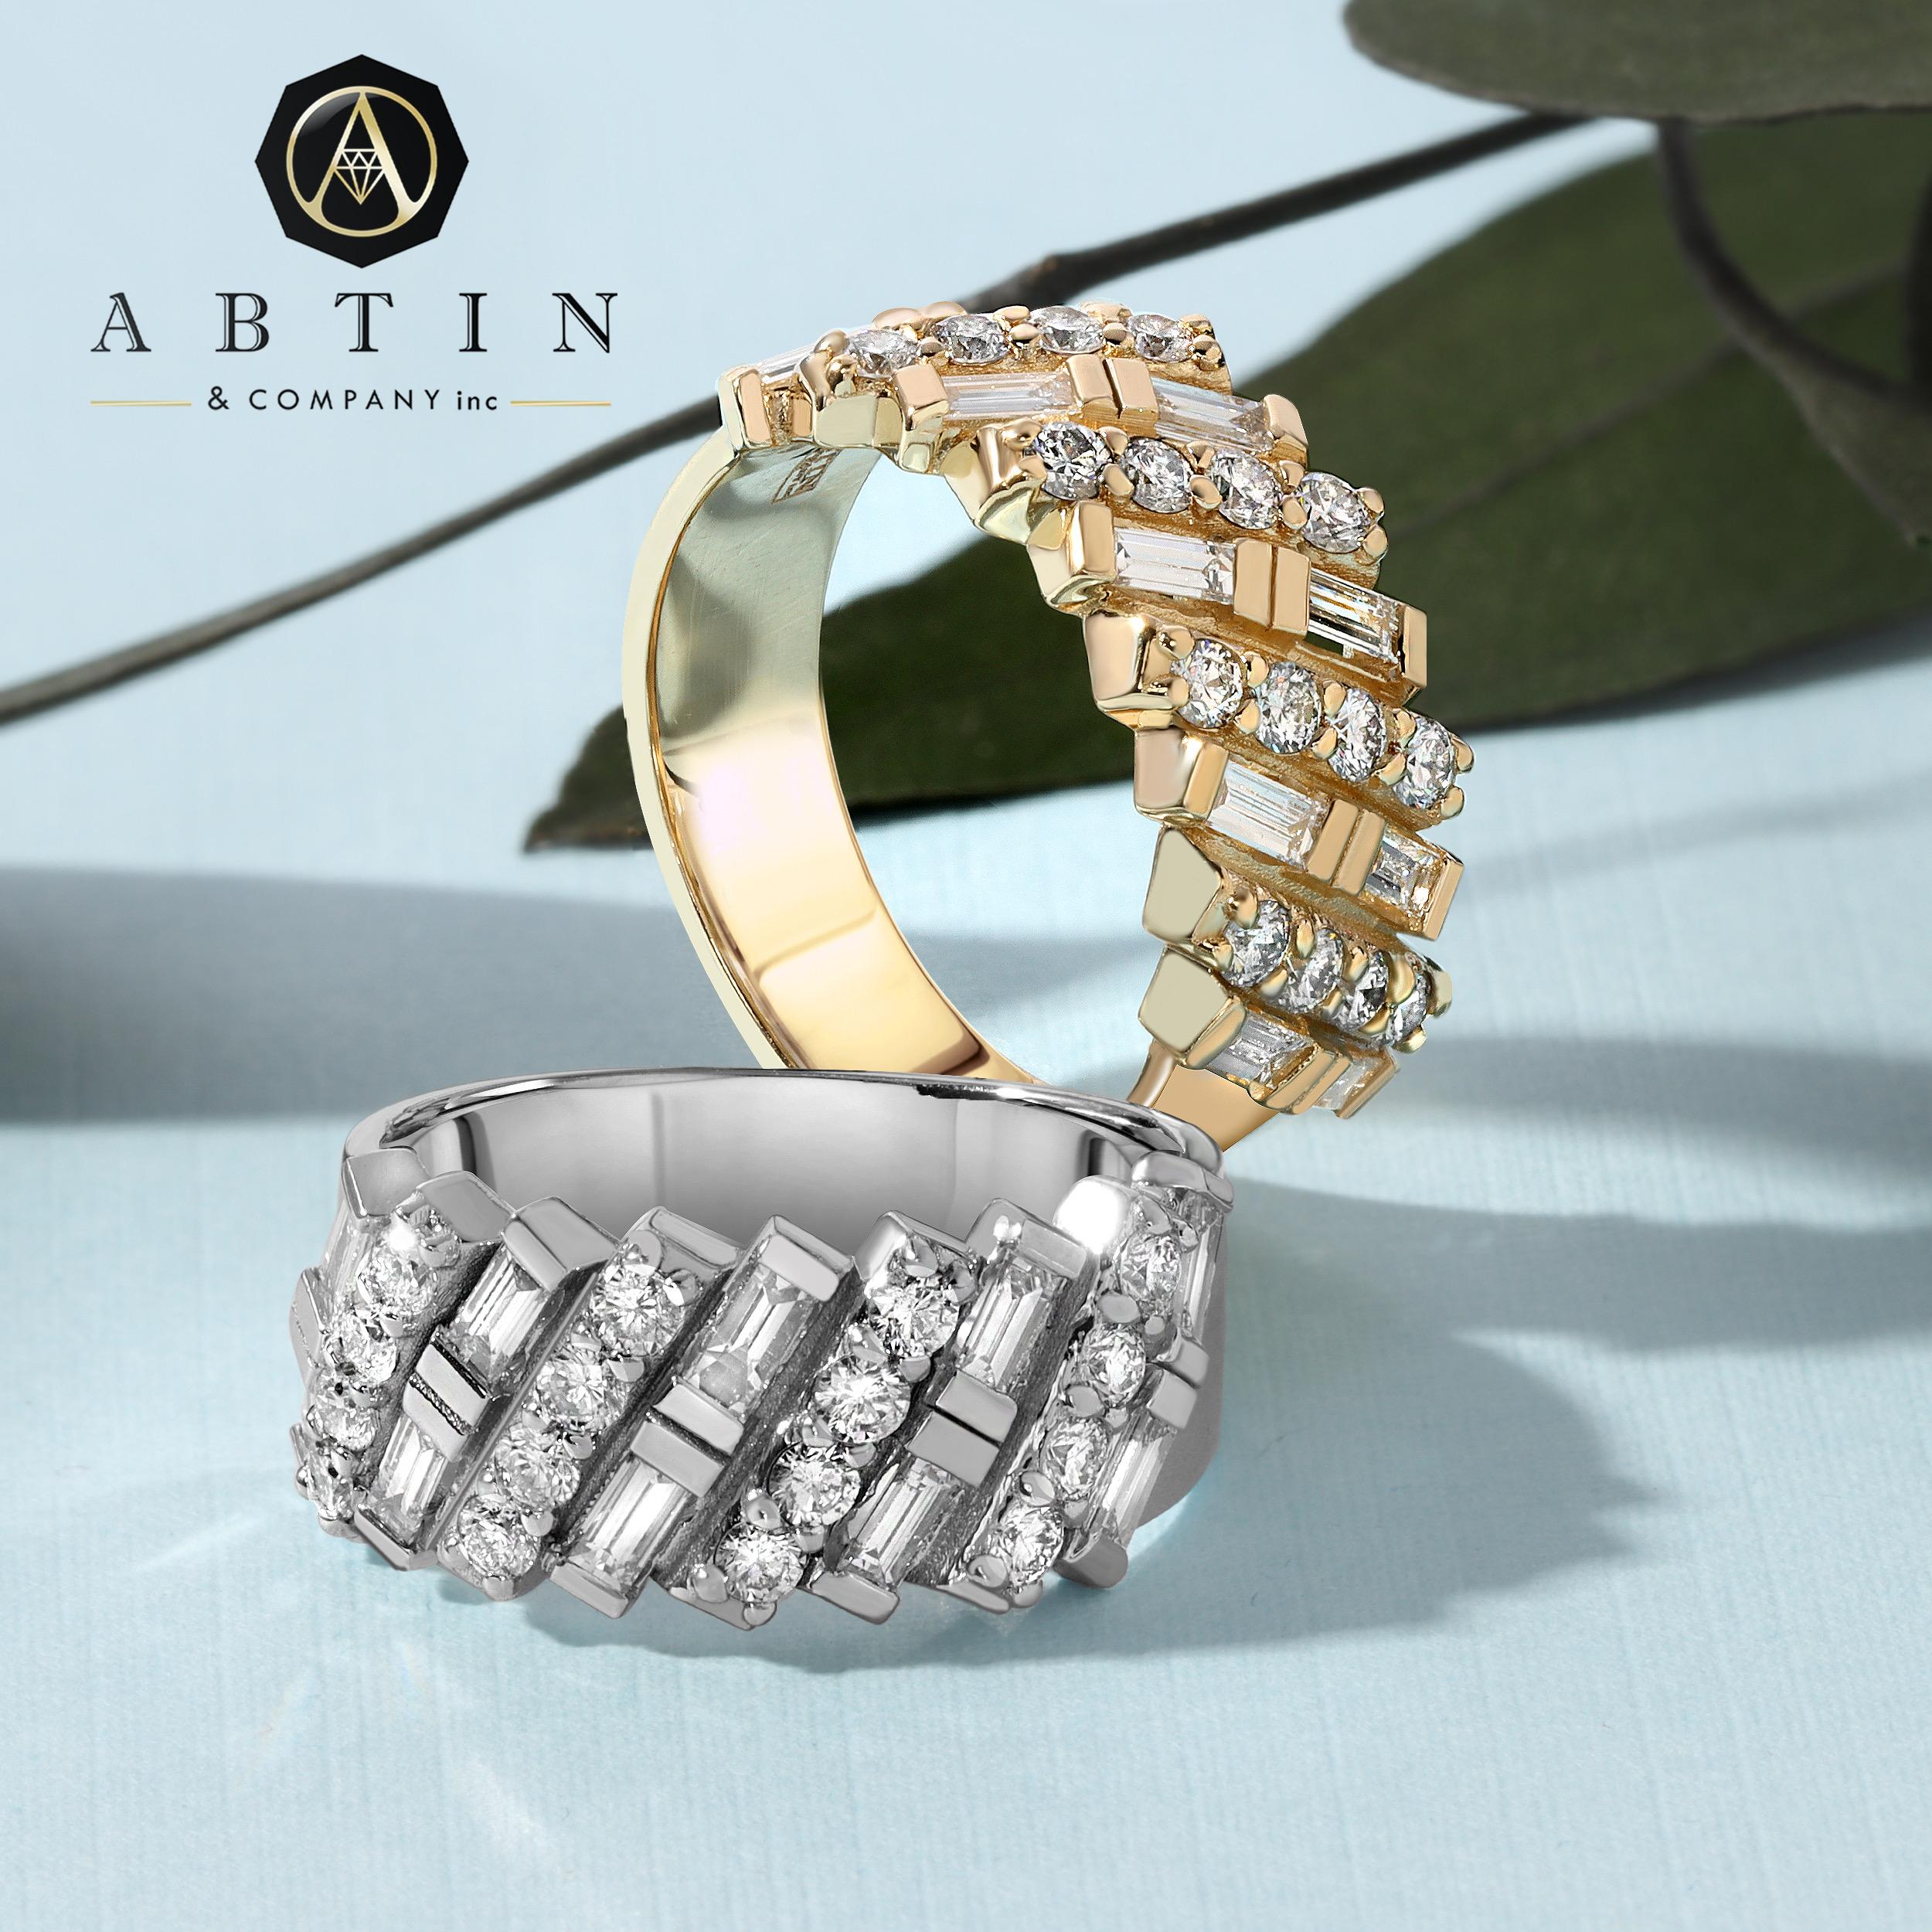 This ring, made in 14K gold, showcases alternating rows of baguette and round diamonds. Its timeless and elegant design, with beautiful accents, makes it perfect for everyday wear—a fabulous gift idea.
Gold Weight: 7.20 gr.
Diamond Weight: 1.020